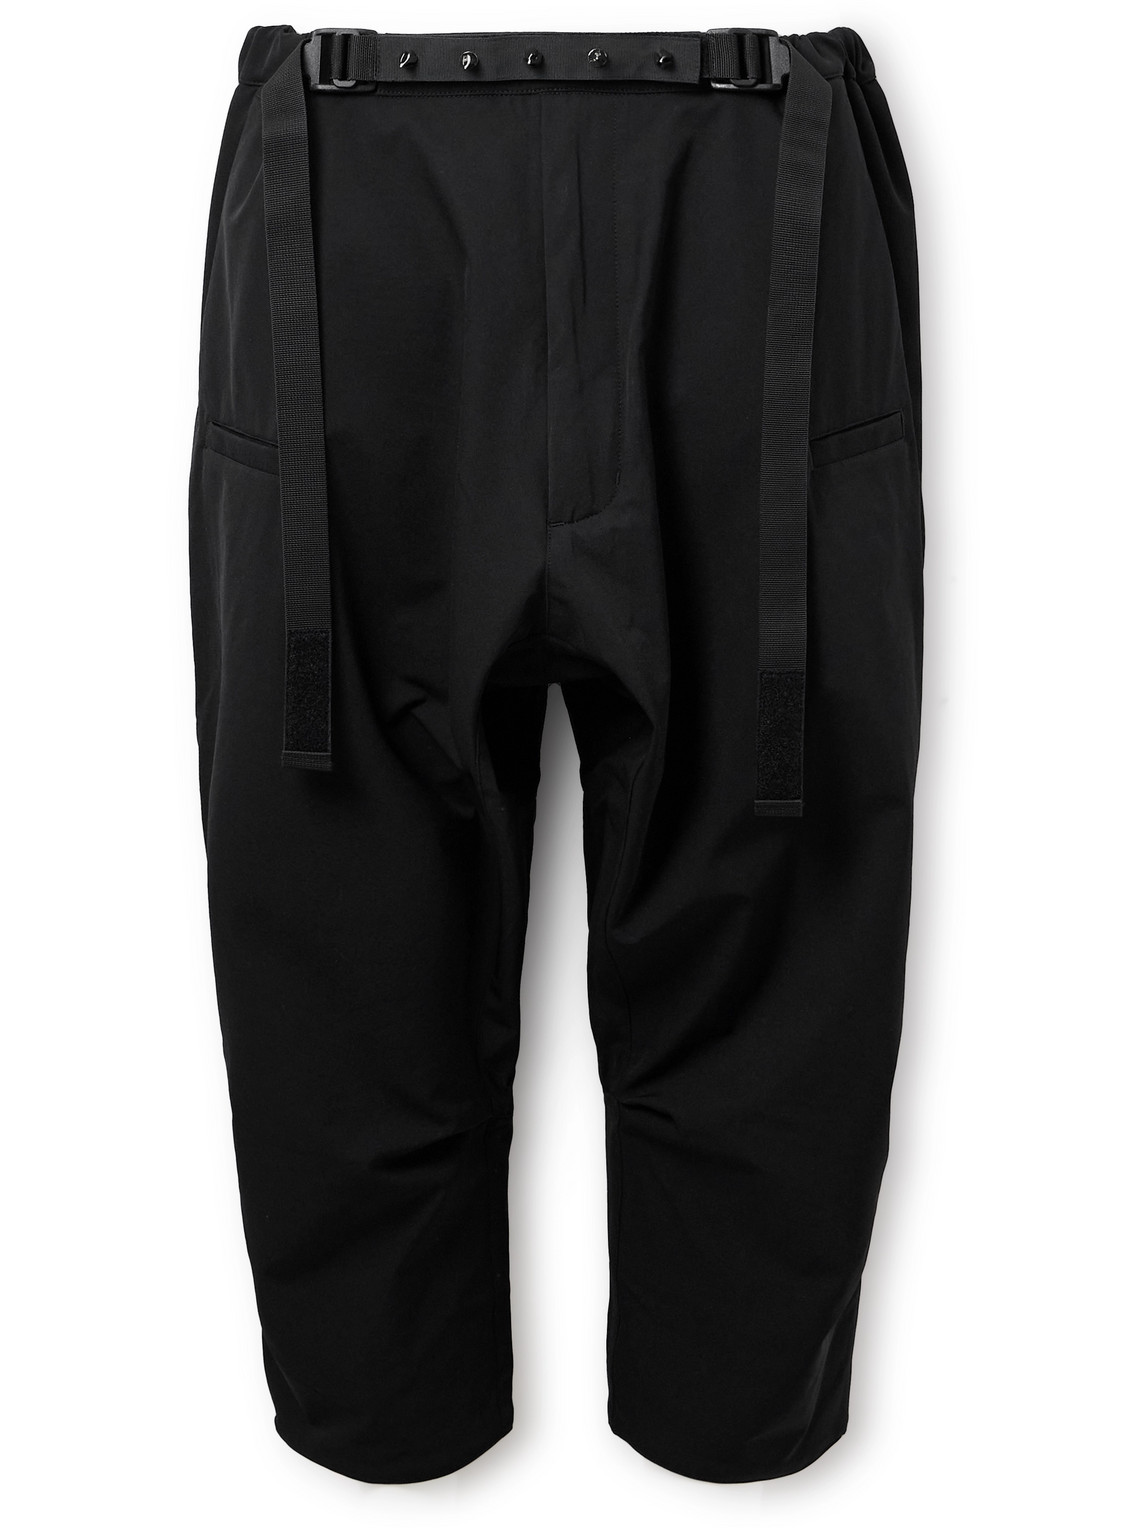 P17-DS Cropped Spiked Belted schoeller® Dryskin™ Trousers